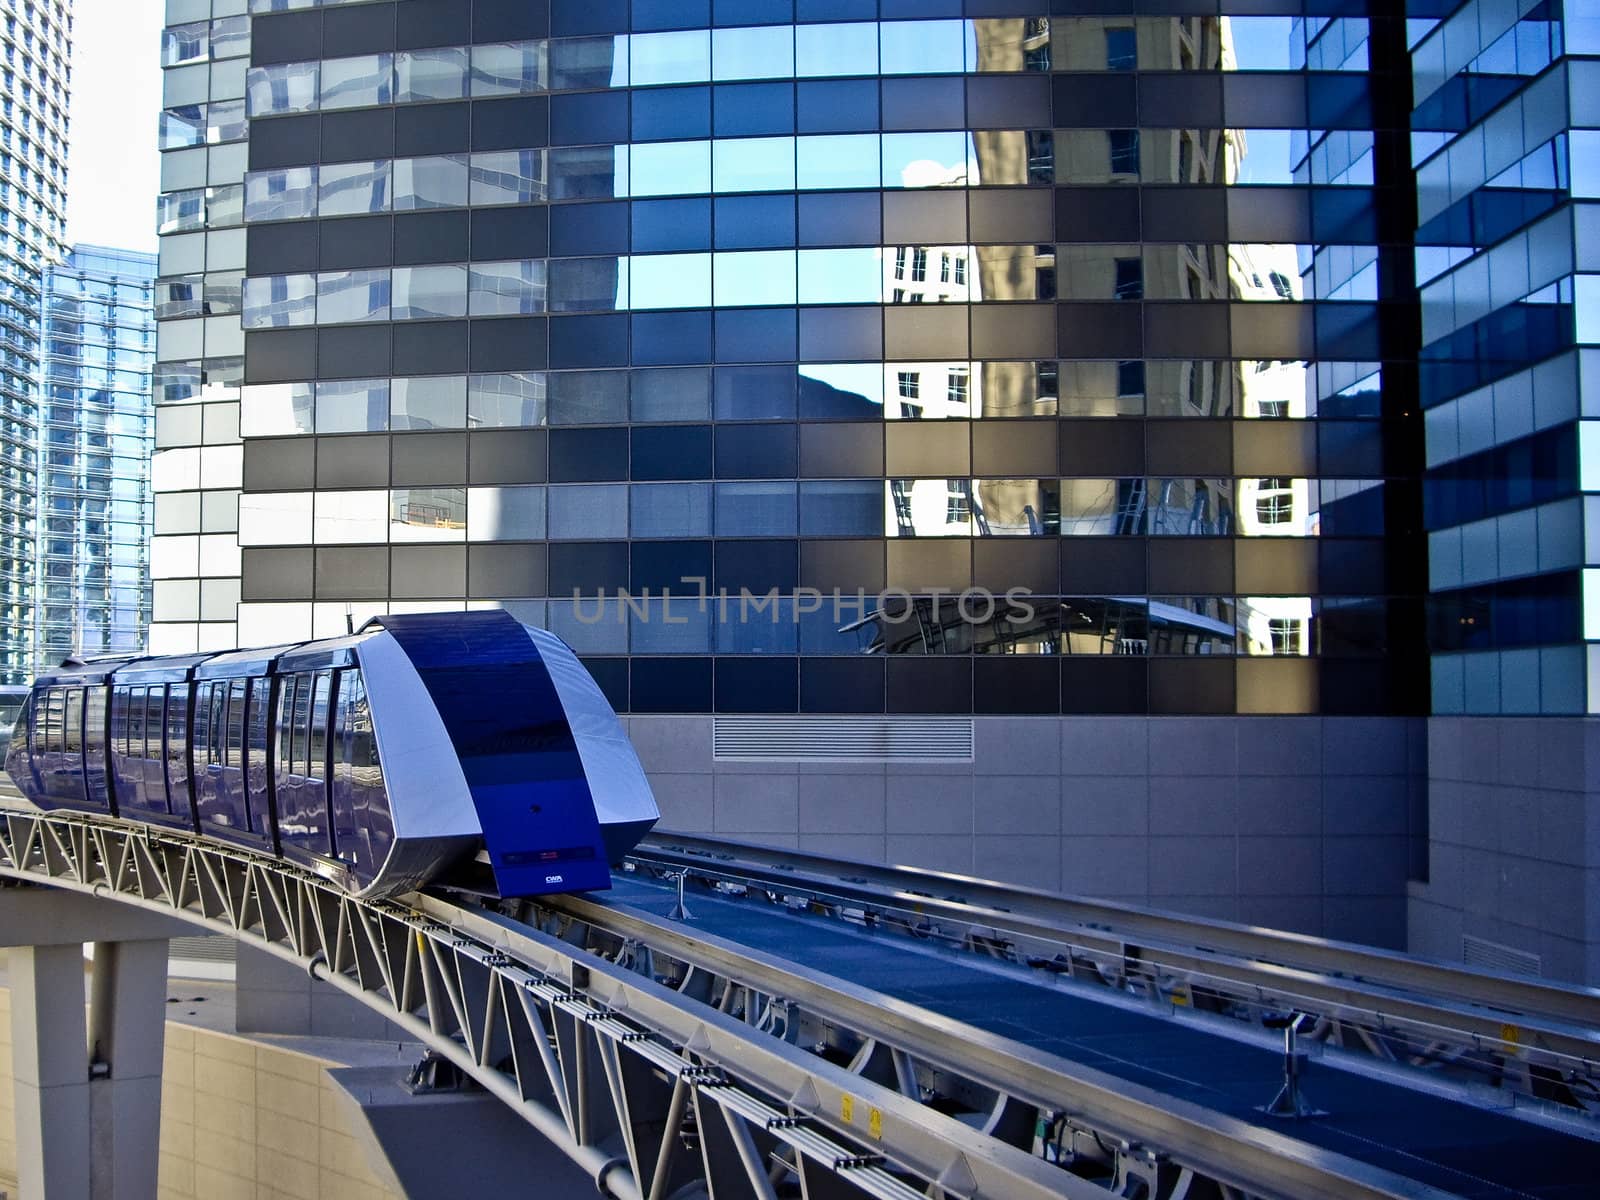 Monorail tram reflects distorted buildings Las Vegas, USA